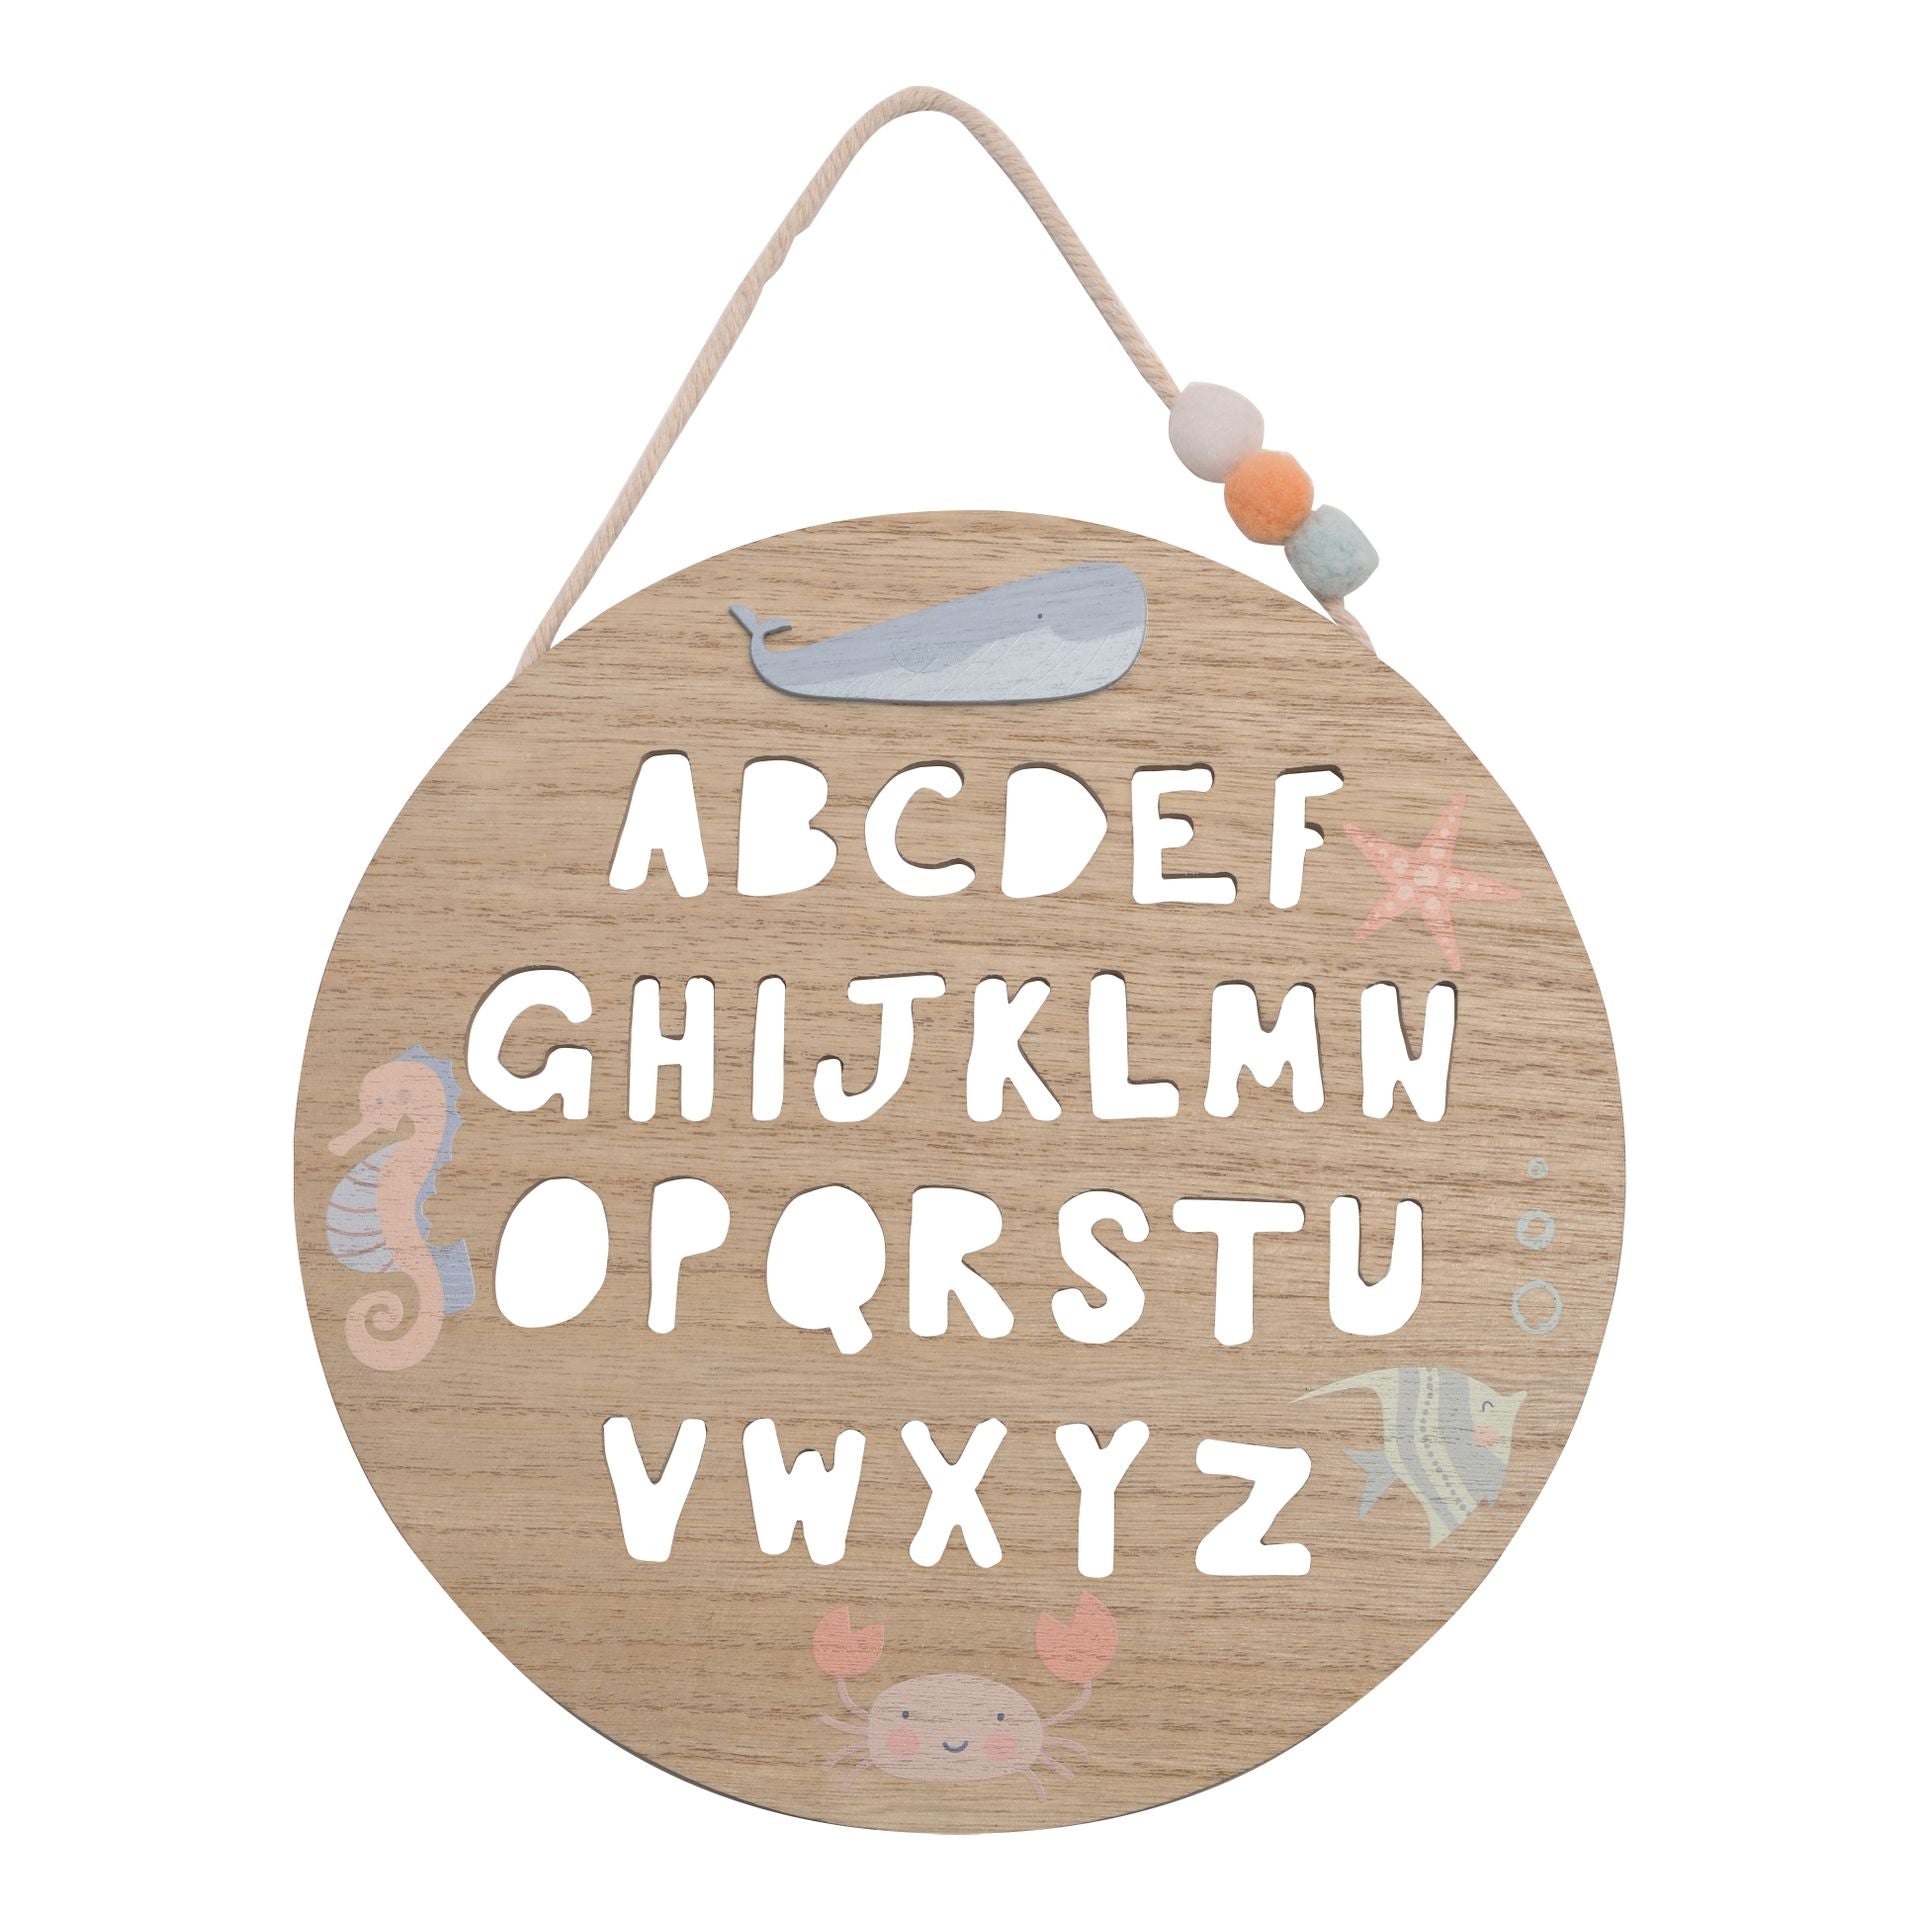 This adorable wall decoration is handmade from wood and features all 26 letters, as well as illustrations of ocean creatures. Perfect for display in a nursery, playroom or kids bedroom